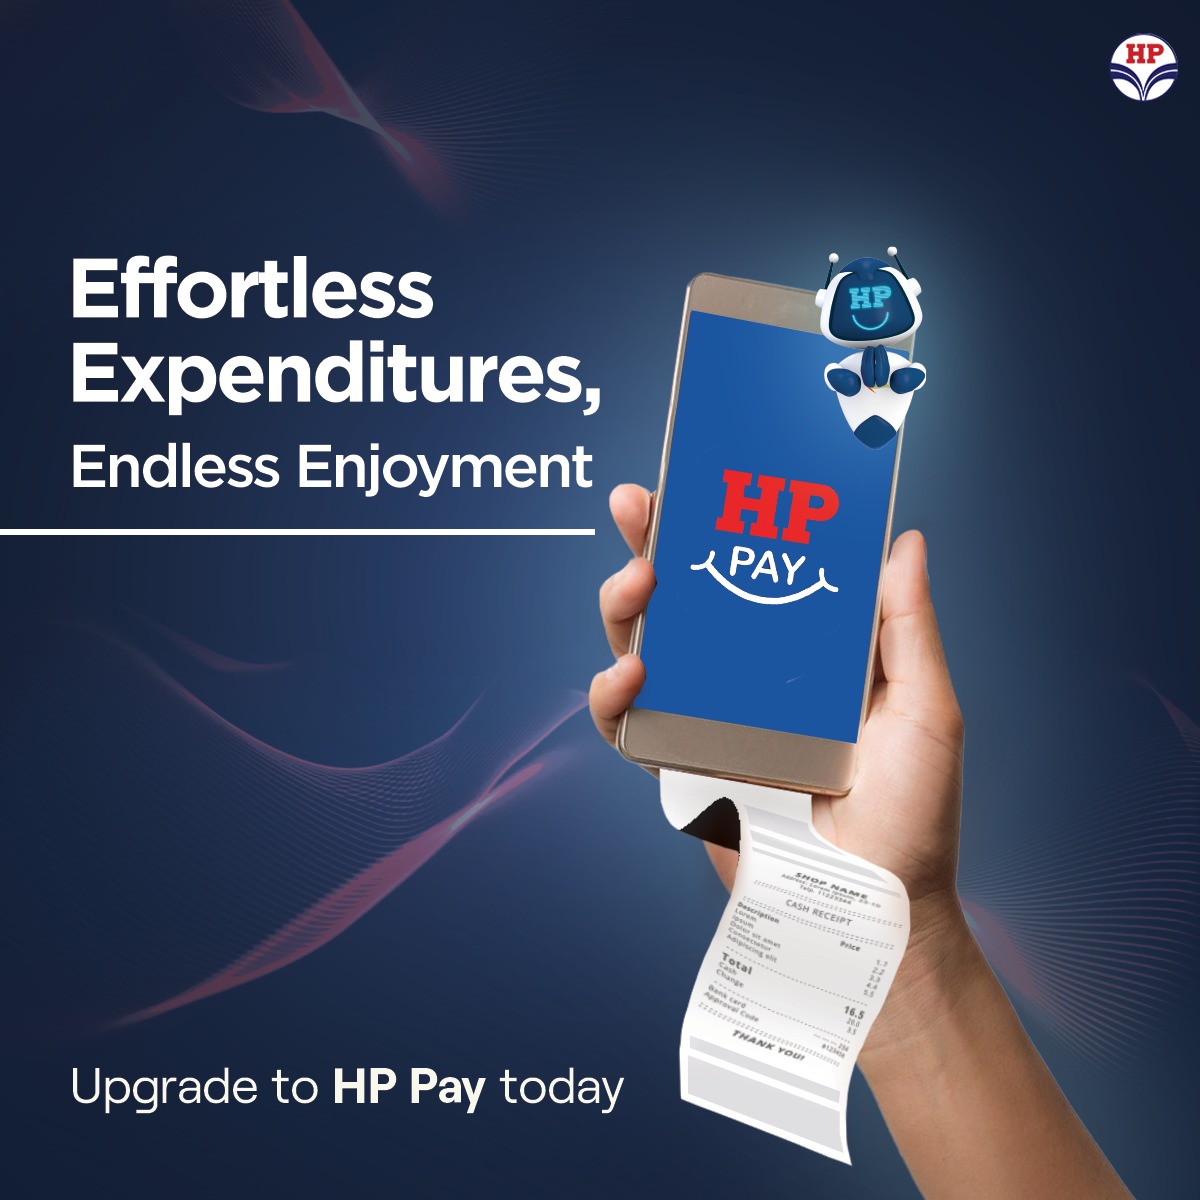 Discover the ease of every transaction with HP Pay! Drive in, fuel up, and breeze through payments hassle-free. Experience seamless convenience at every stop. #HPRetail #MeraHPPump @hpcl #HPPay